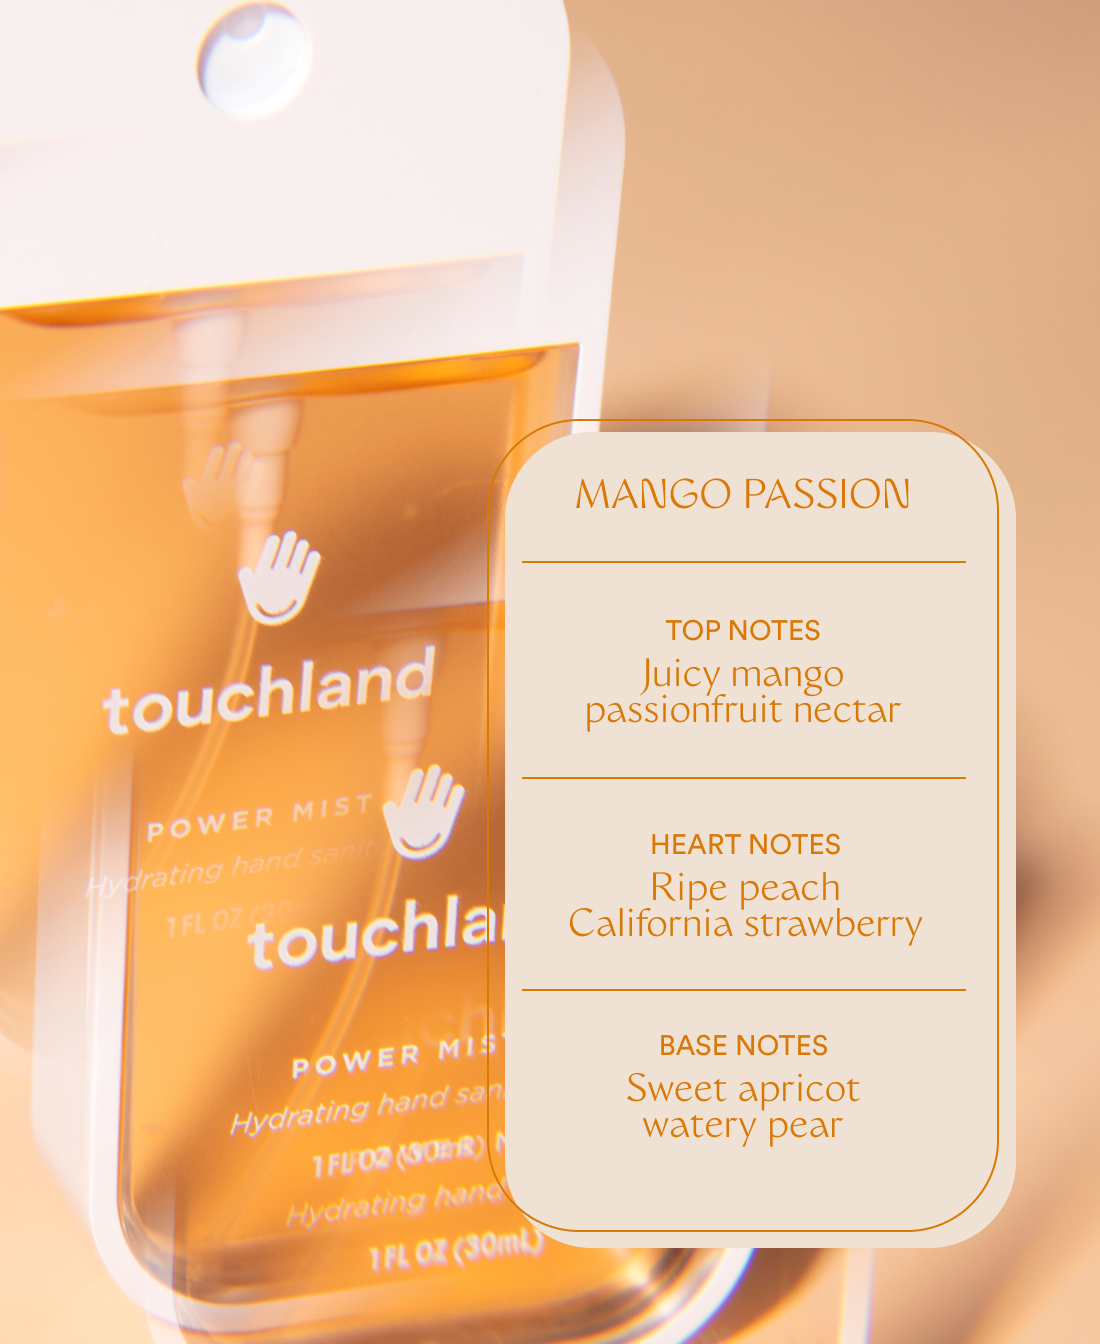 Prism effect of a Power Mist bottle picture with scent notes (top, heart, and base notes) section of the Mango Passion scent.